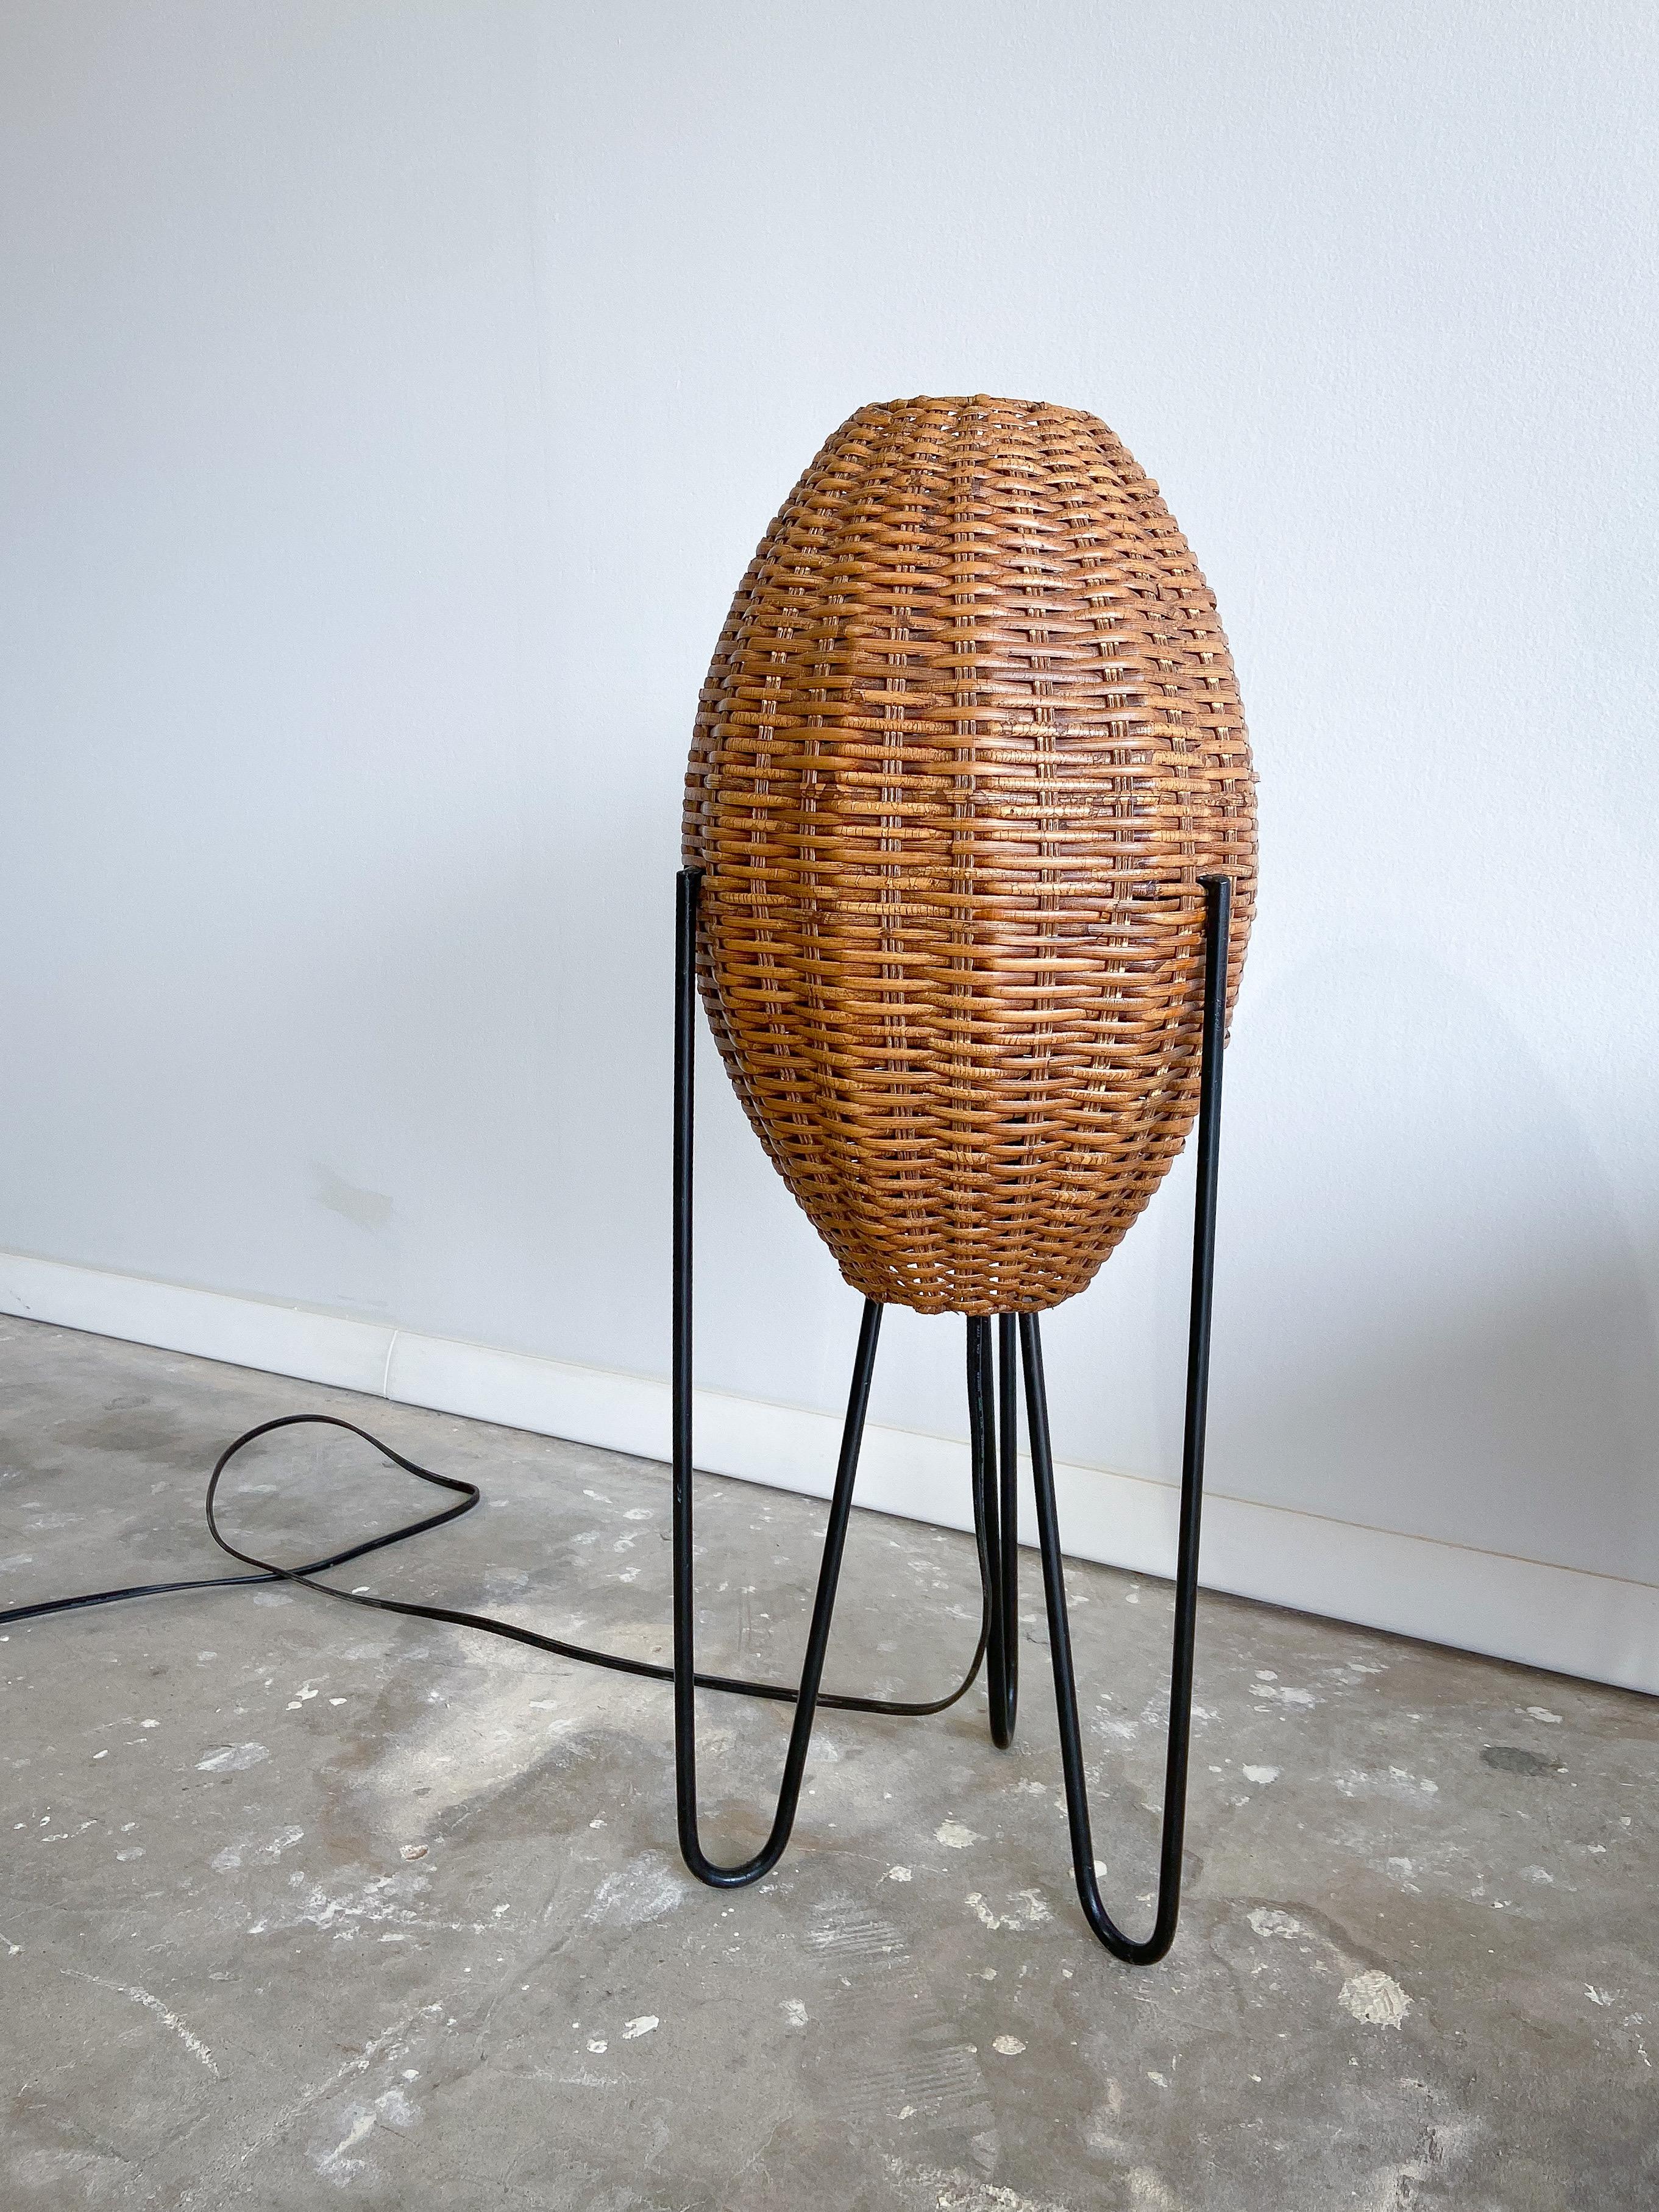 Offered is a unique large scale table lamp by Paul Mayén.

Featuring a handmade wicker shade supported by a formed and enameled steel frame.

When illuminated this lamp gives off a wonderful warm glow. 

This would be a great addition to any